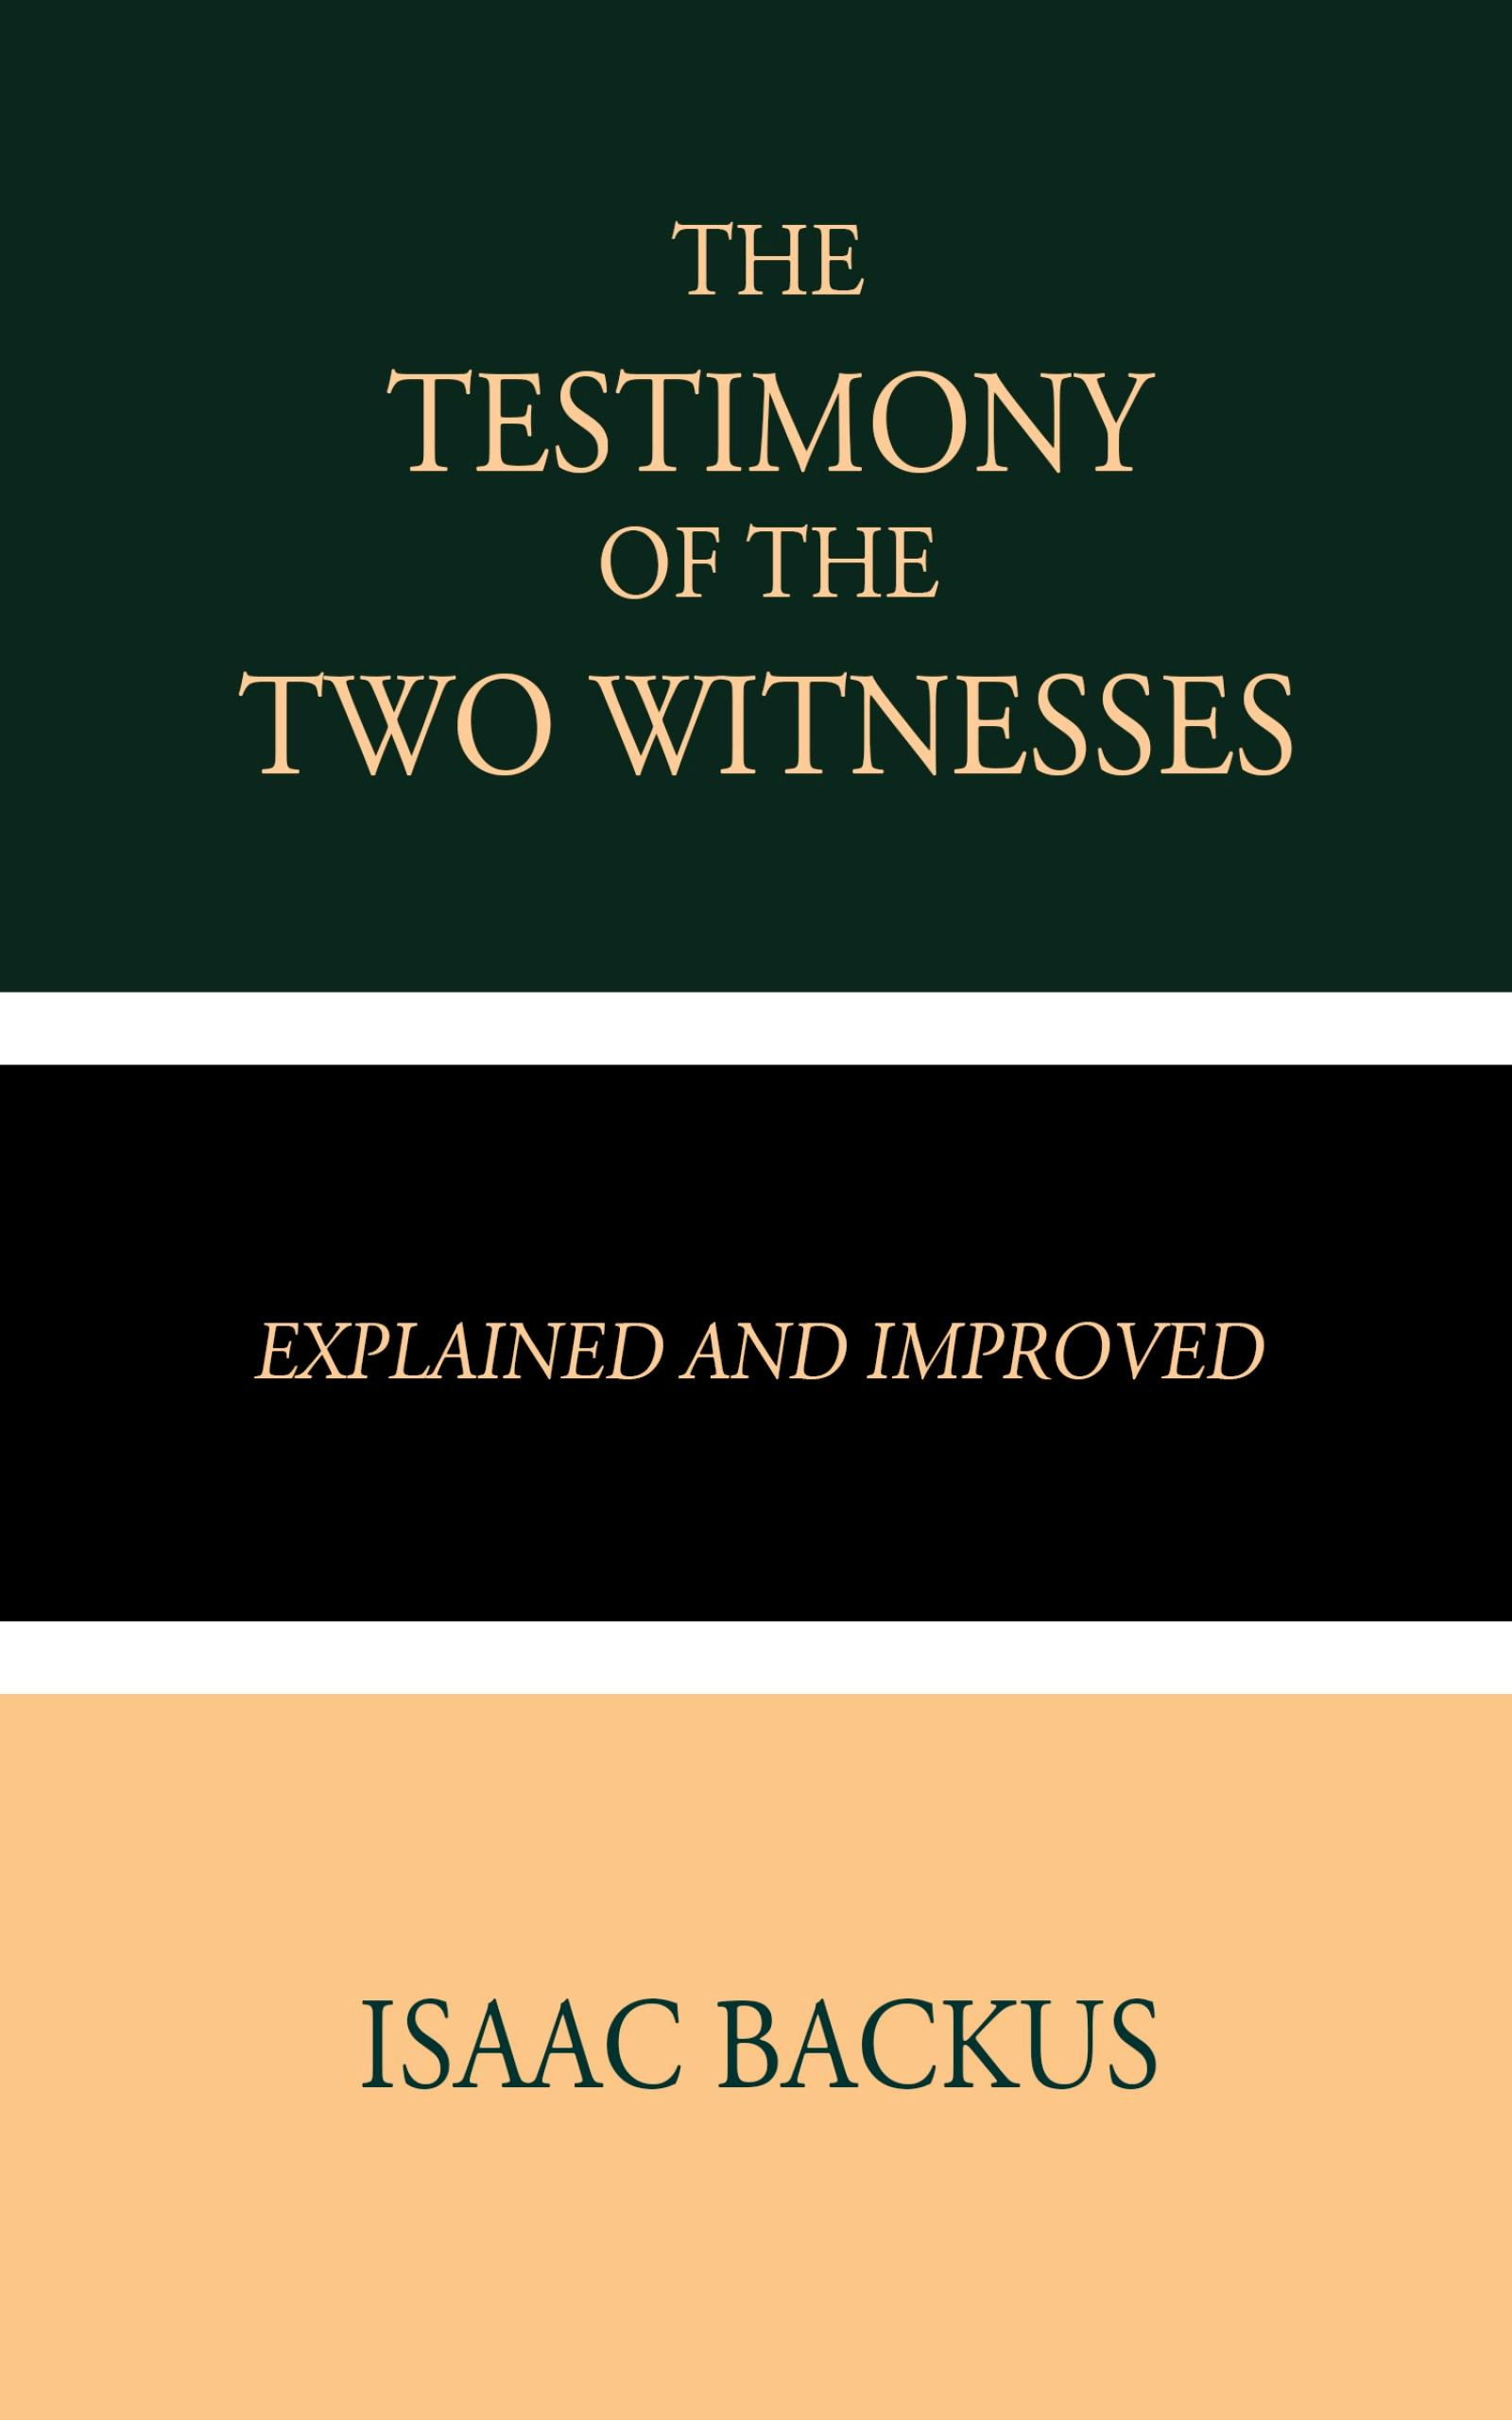 The Testimony of the Two Witnesses - undefined